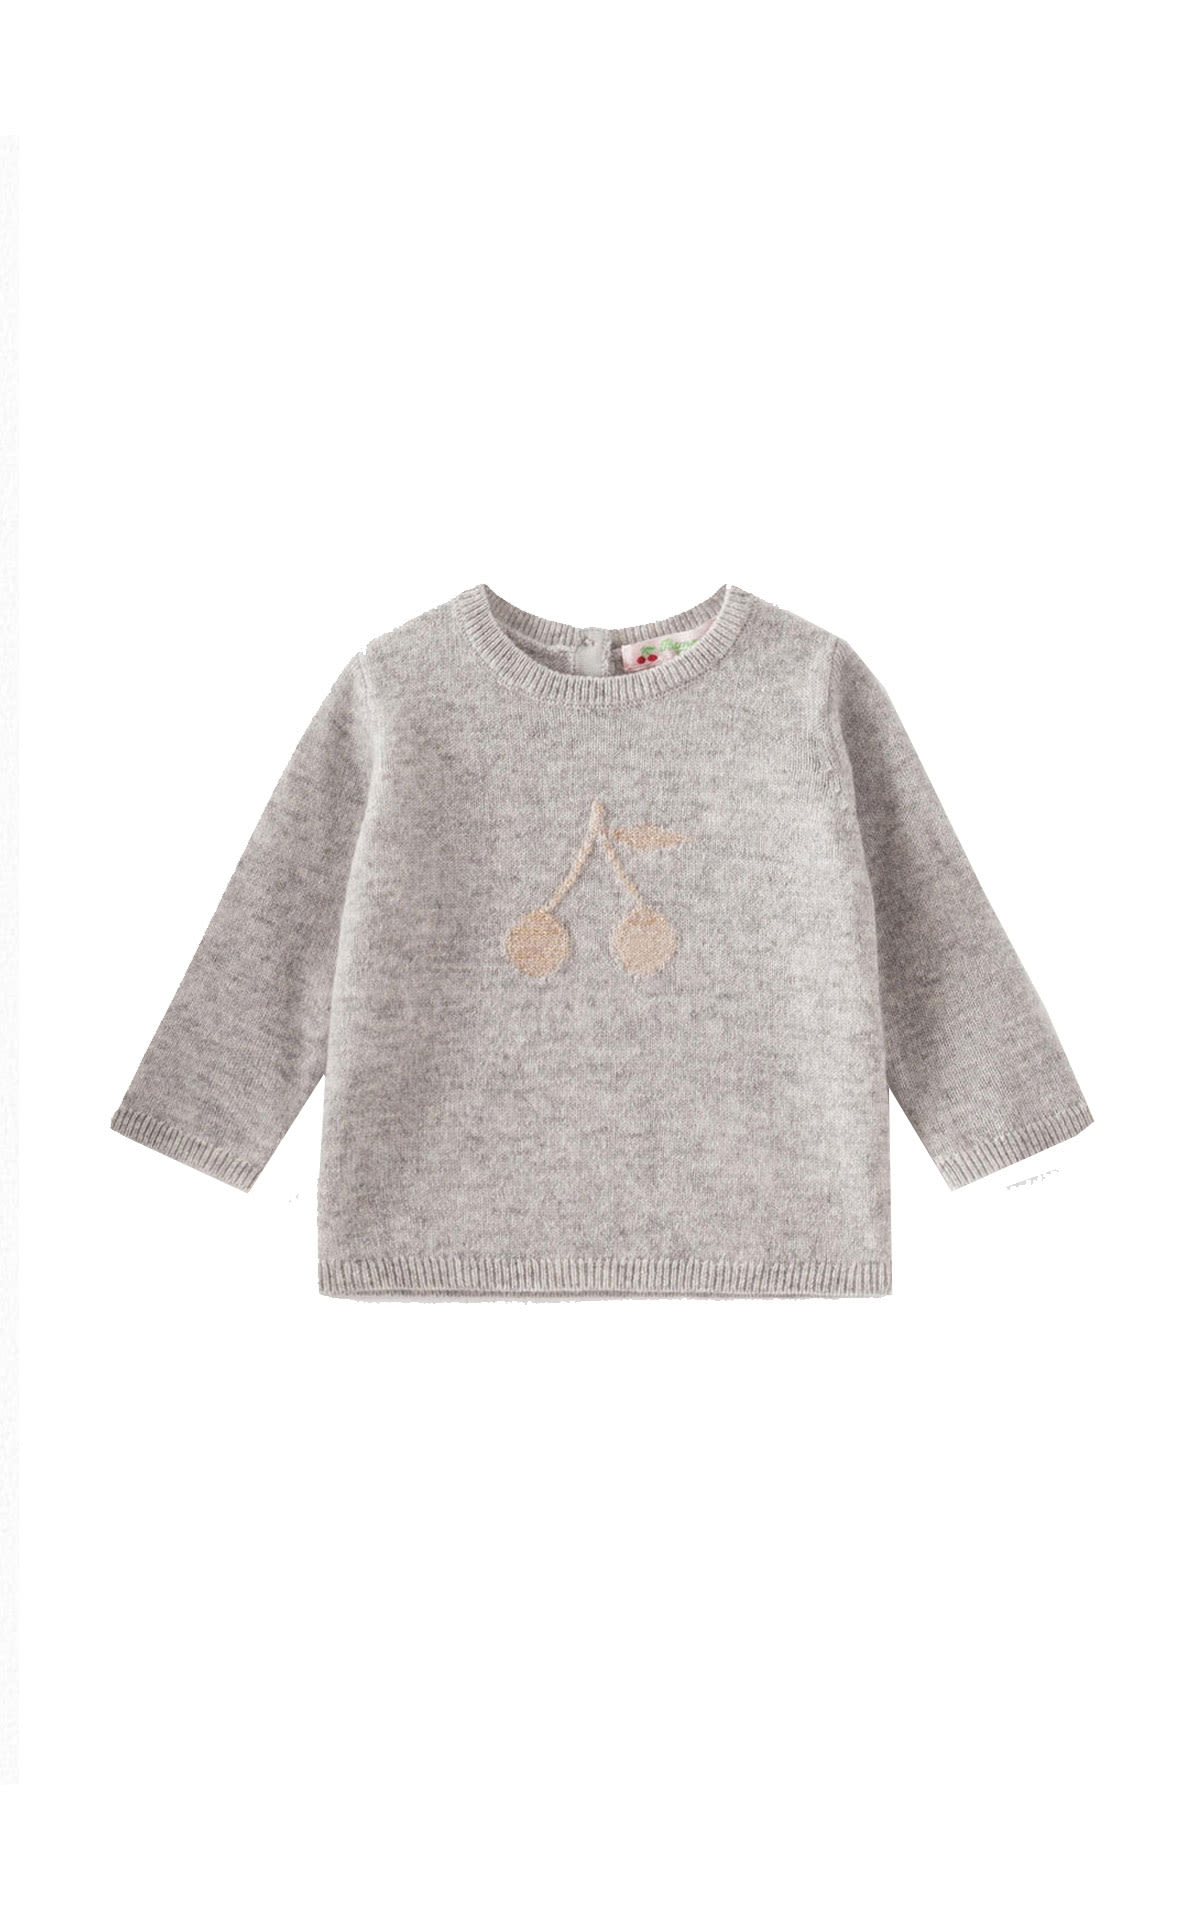 Bonpoint Baby cherry sweater from Bicester Village